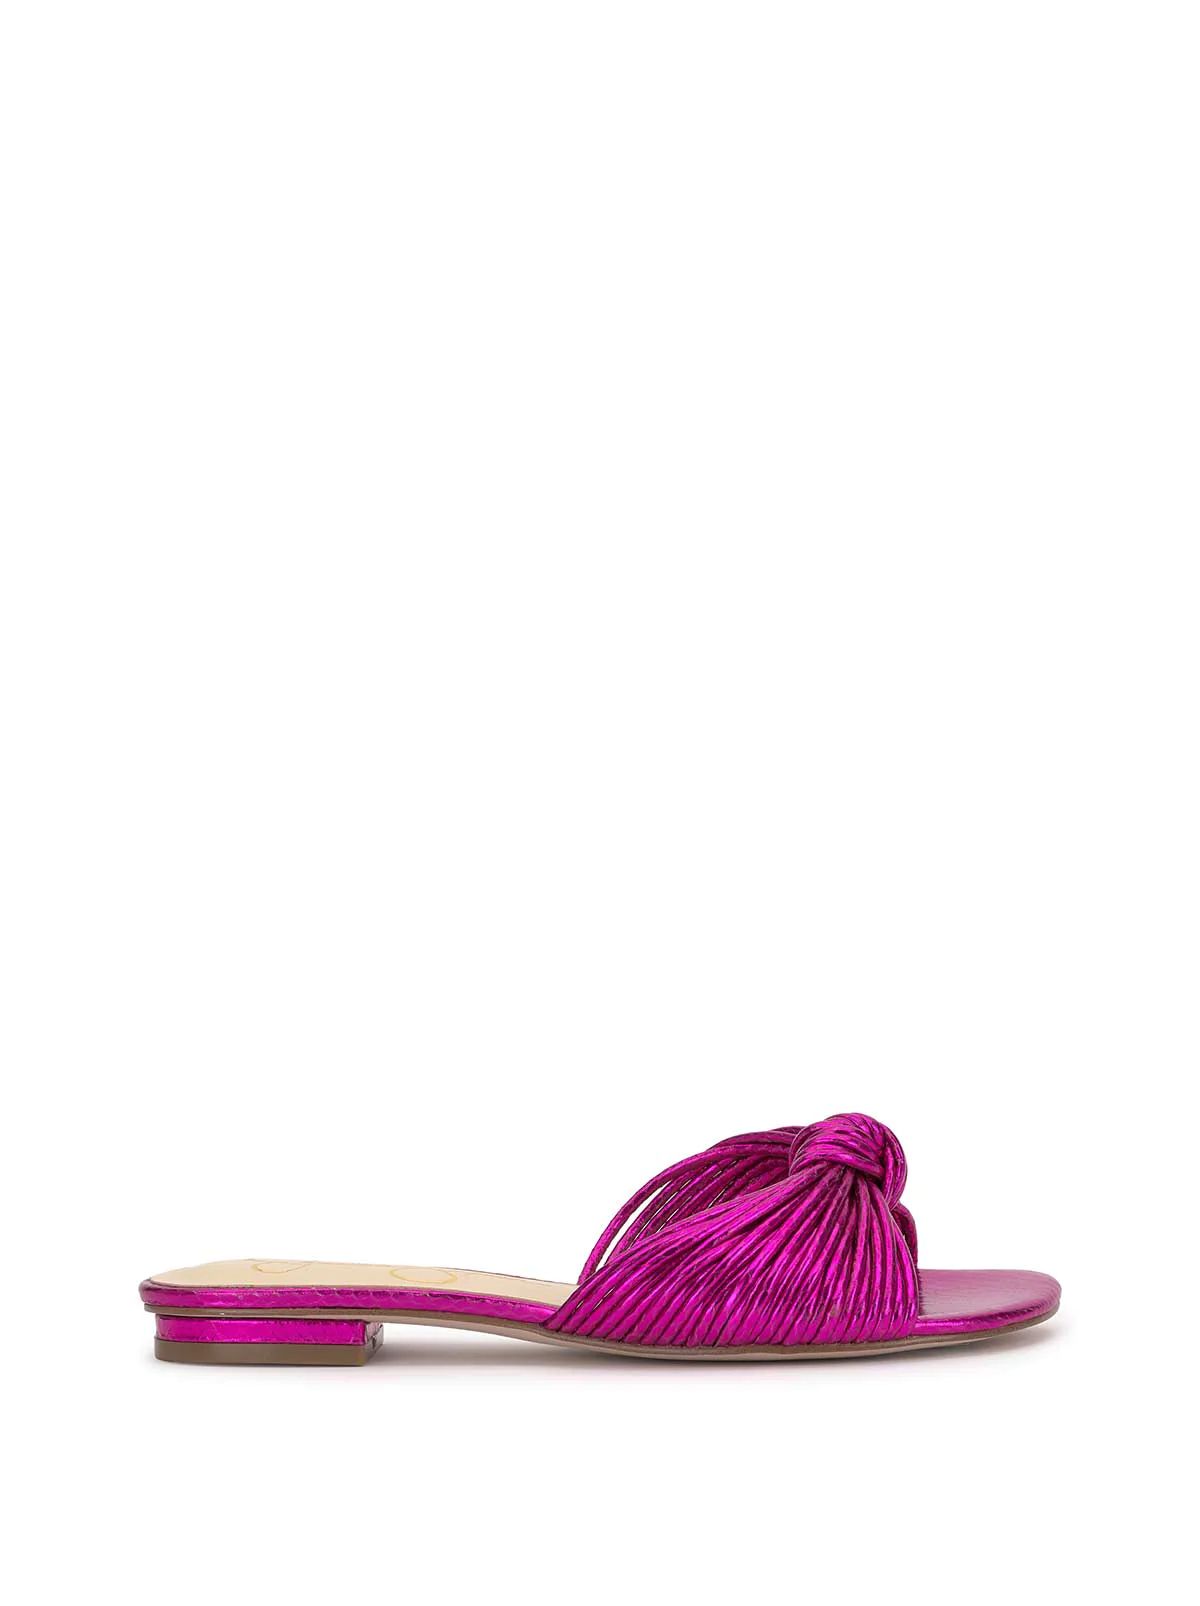 Dydra Knotted Flat Sandal in Pink | Jessica Simpson E Commerce